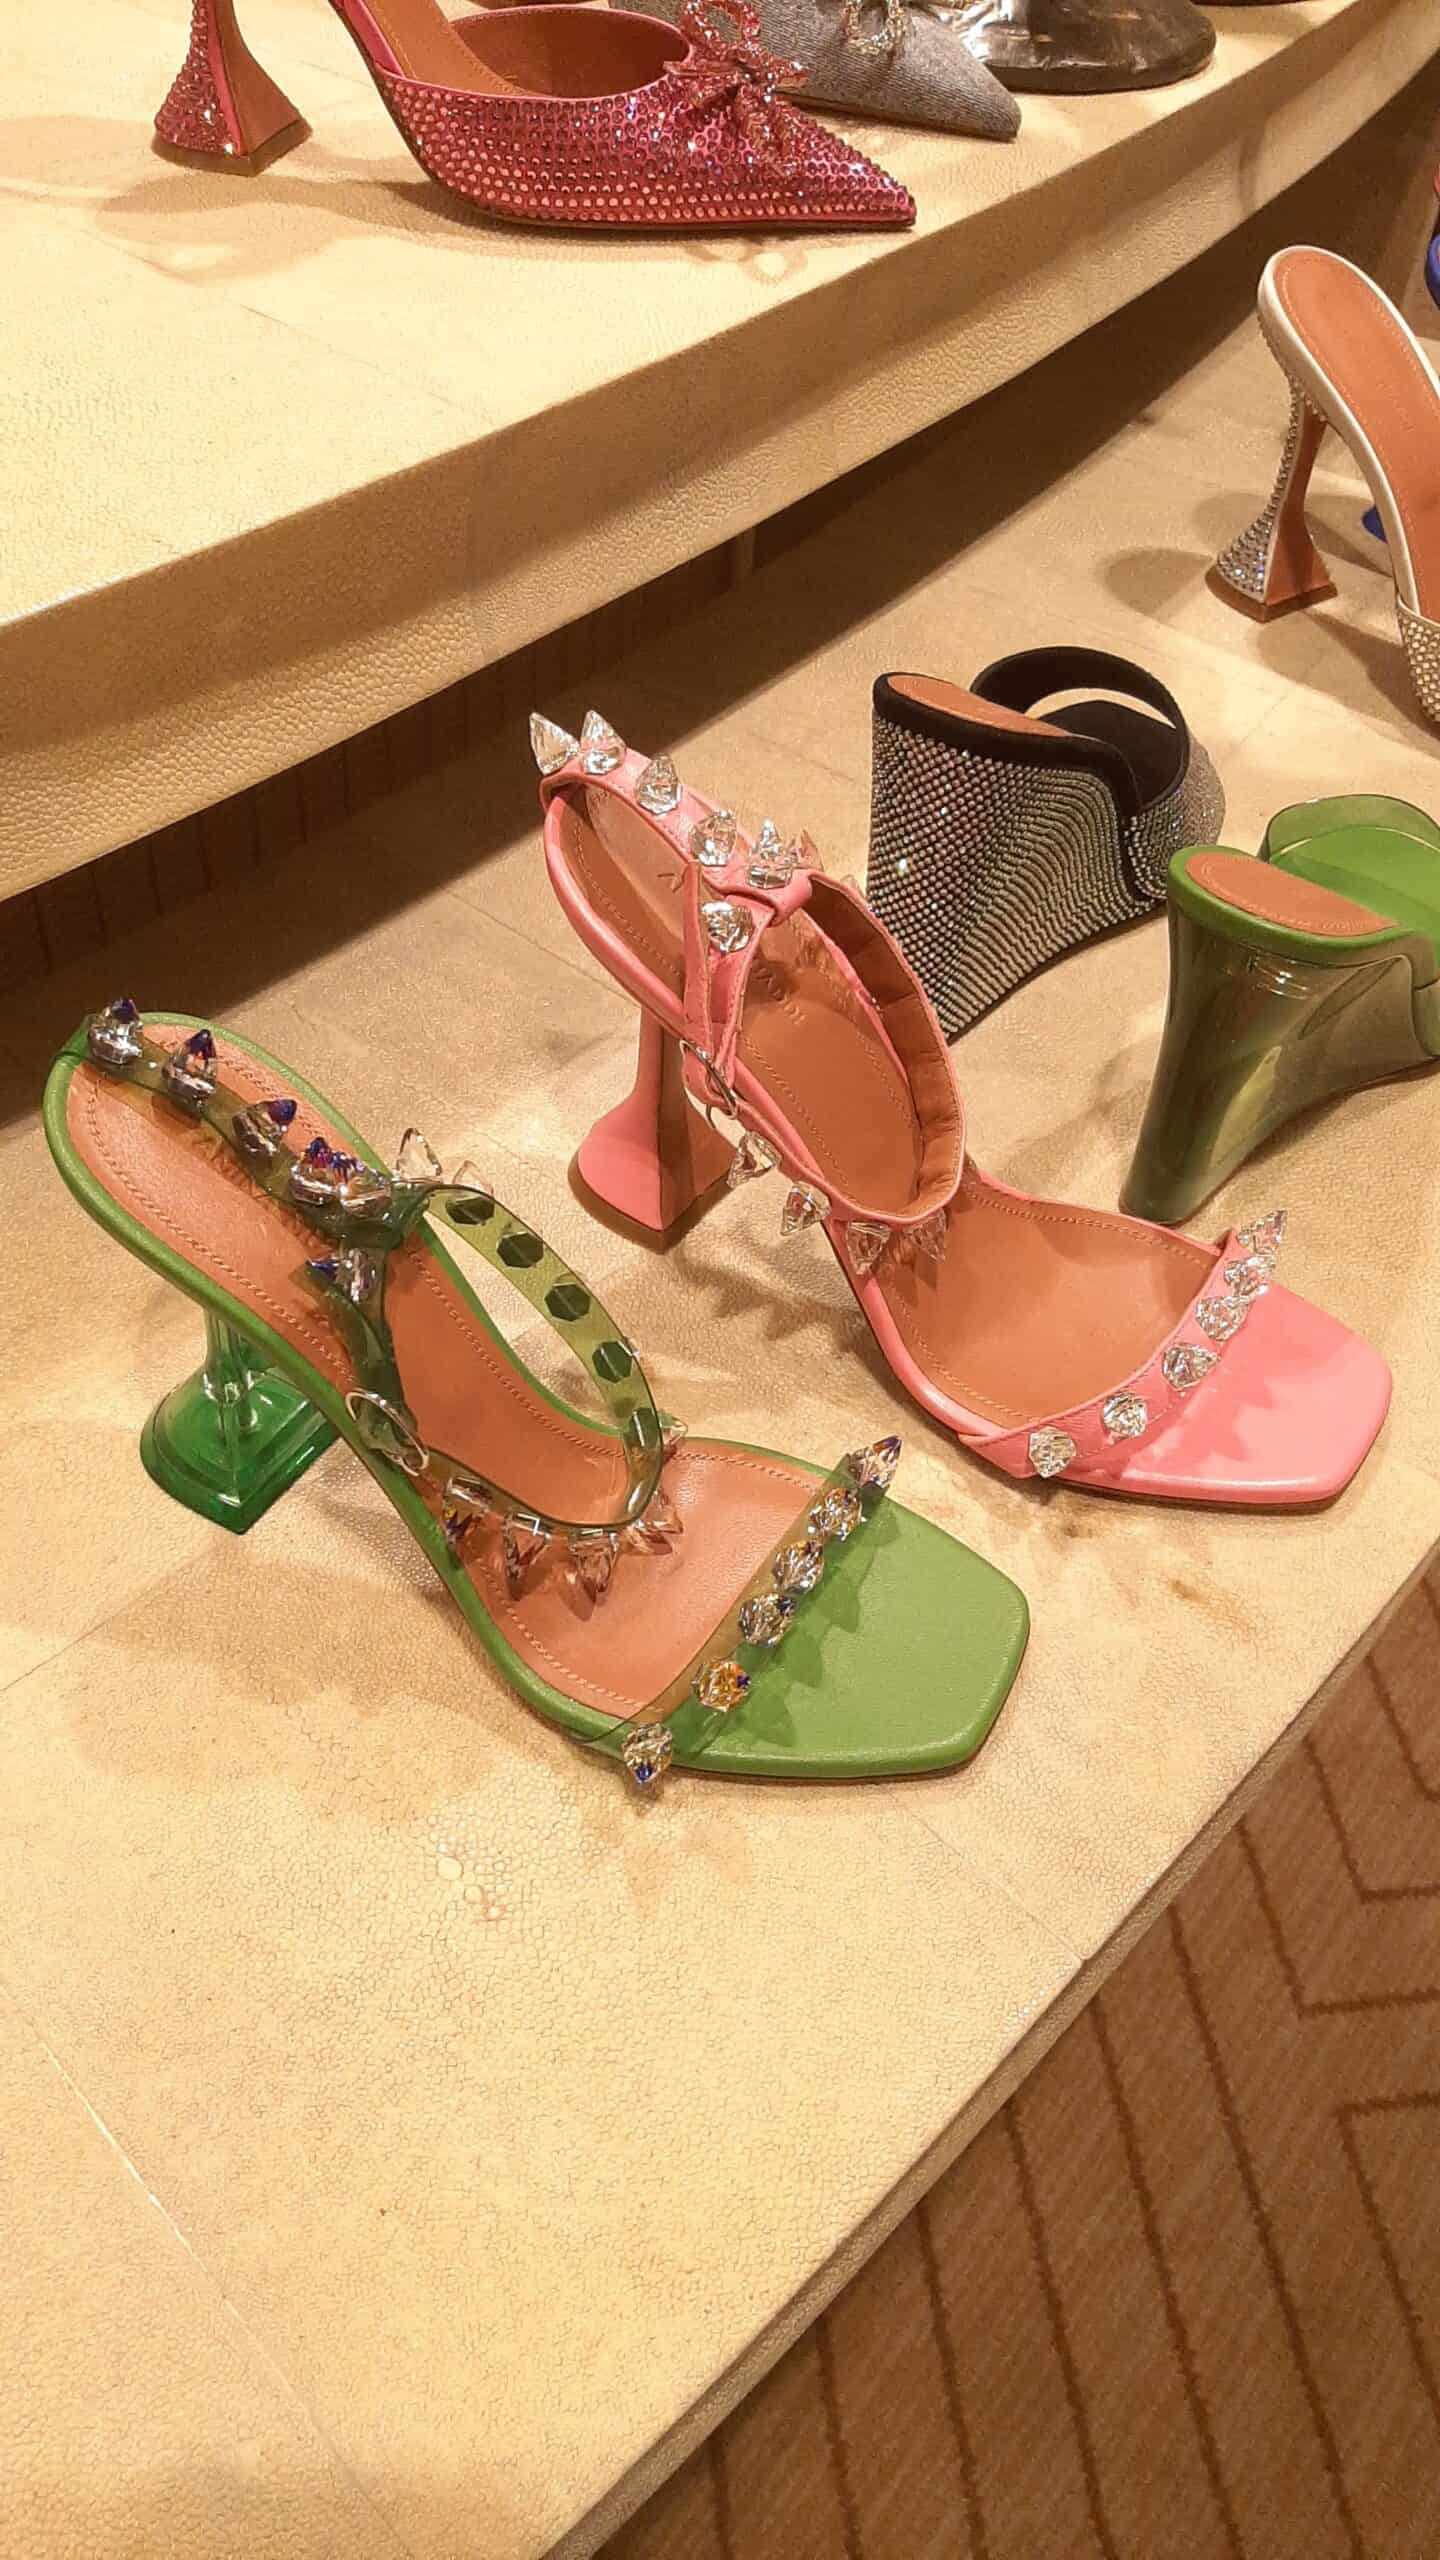 retail women ss23 party sandals strappy acrylic heels leather vynil crystals studs green pink amina muaddi